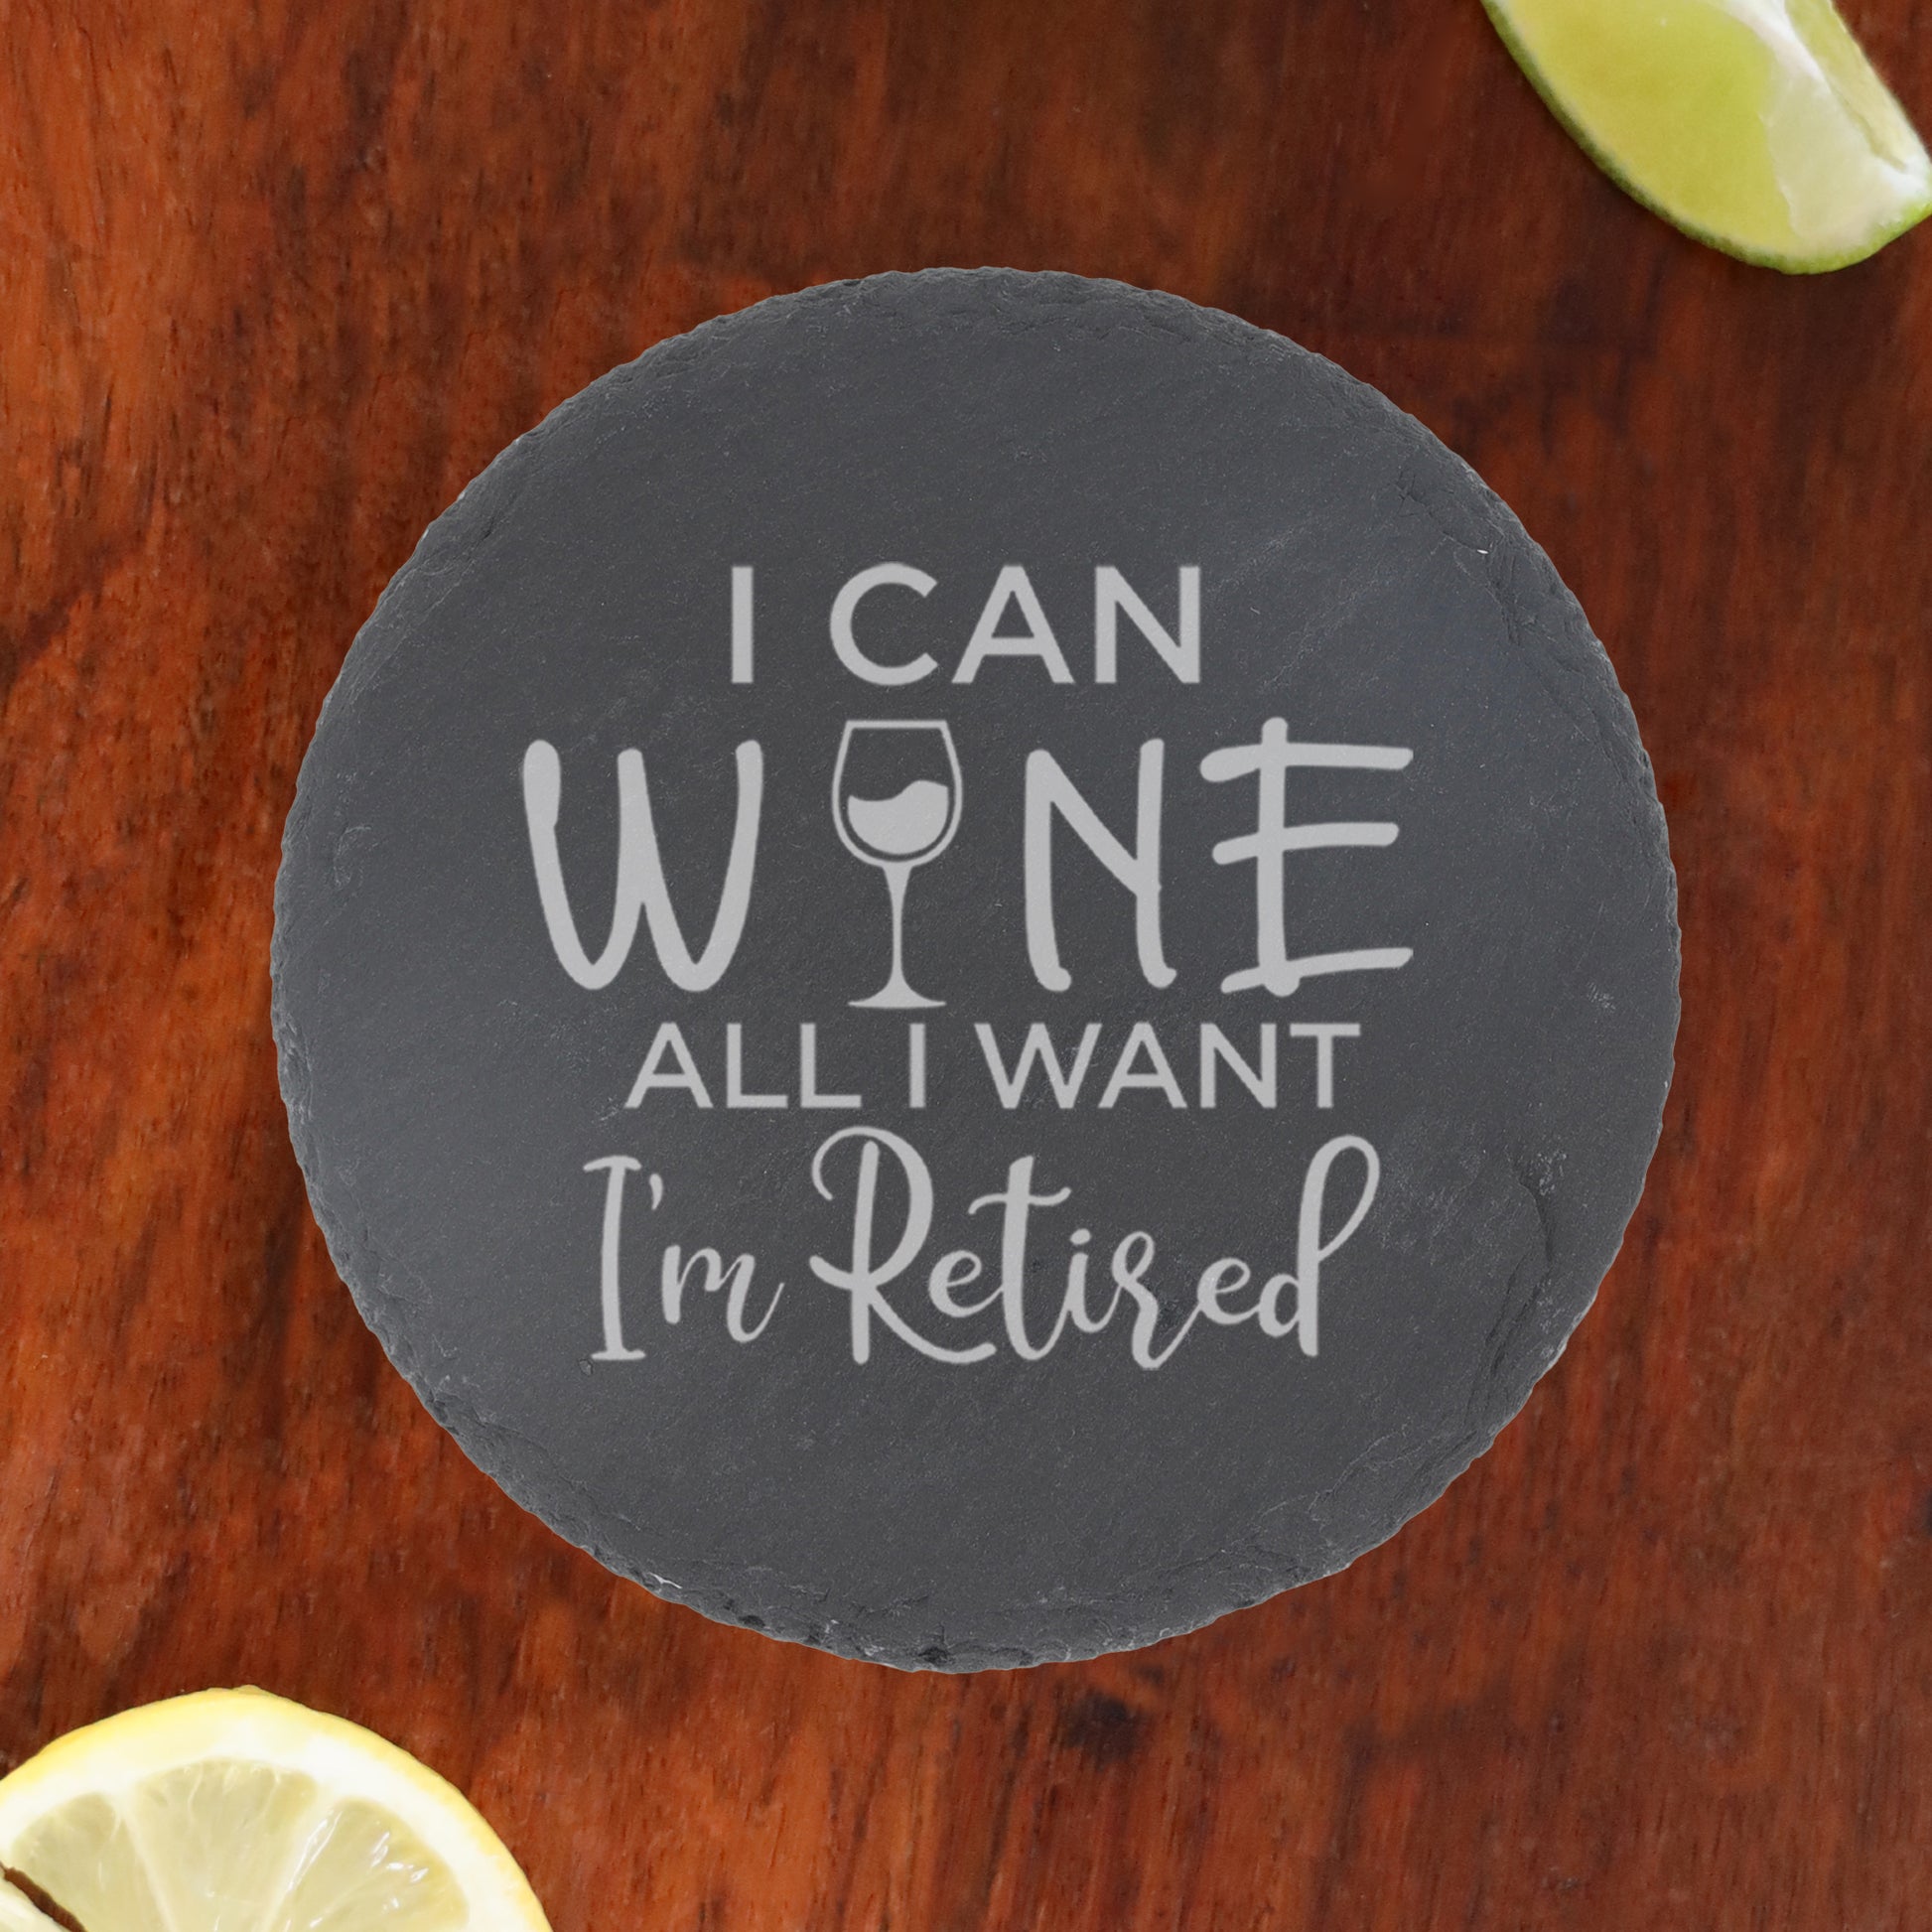 Engraved "I can wine all I want I'm retired" Funny Retirements and/or Coaster Novelty Gift  - Always Looking Good - Round Coaster Only  